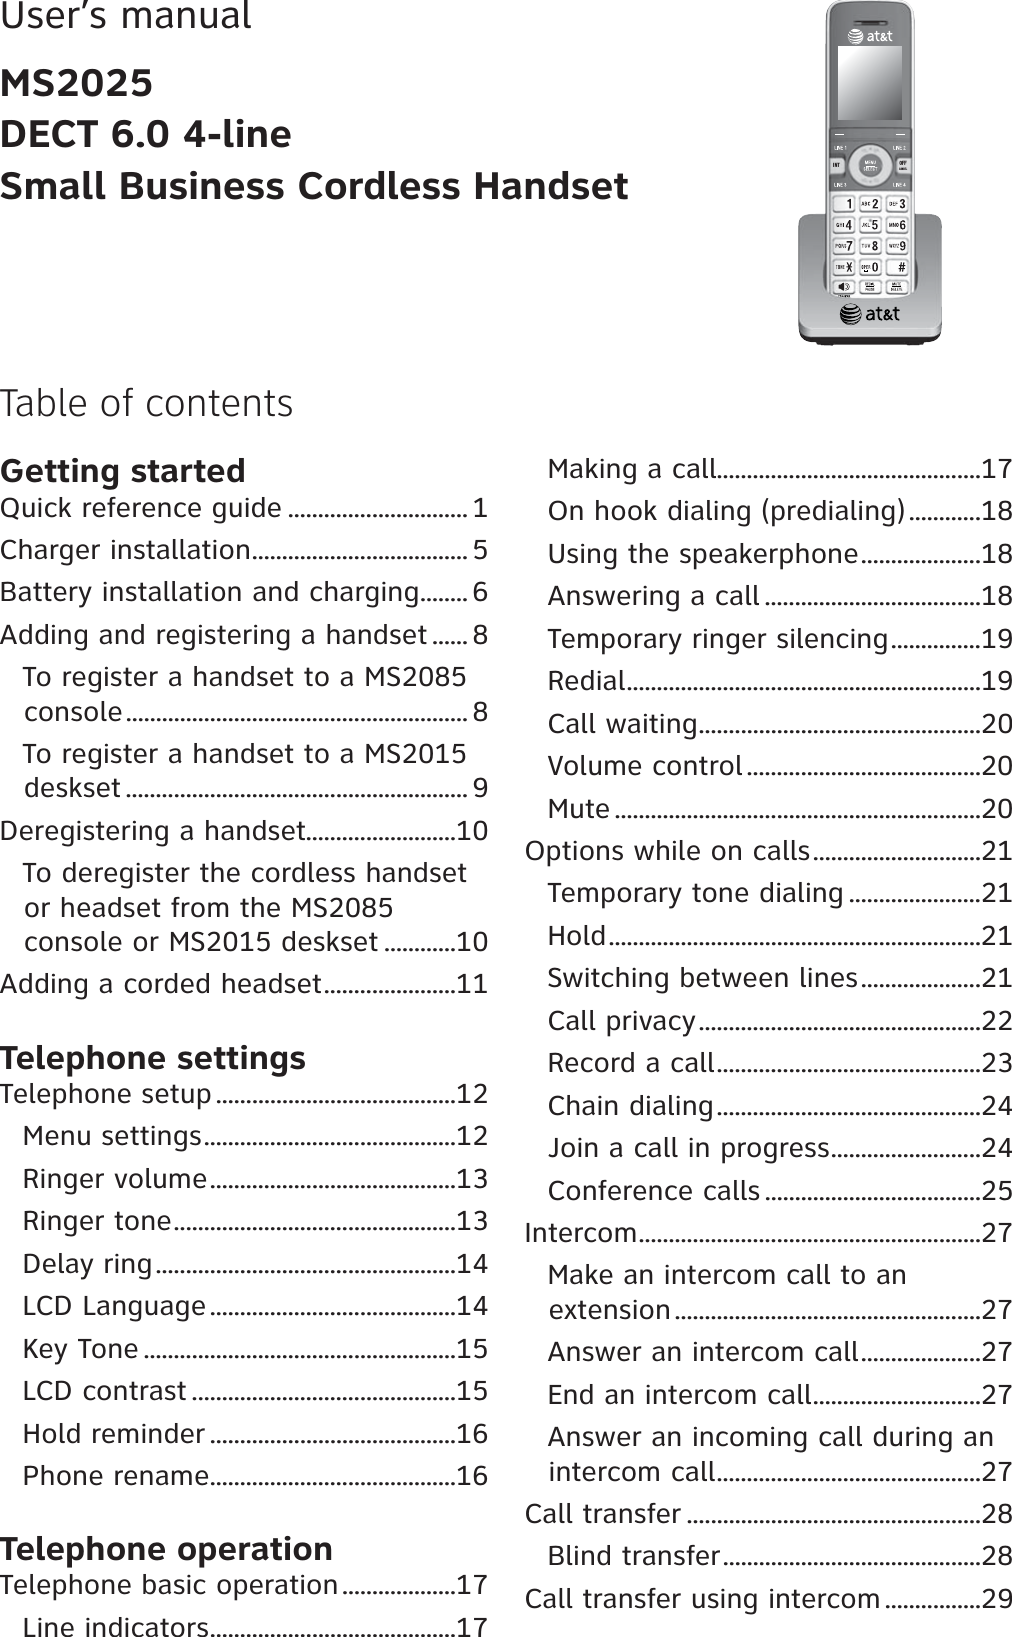 Table of contentsUser’s manualMS2025DECT 6.0 4-lineSmall Business Cordless HandsetGetting startedQuick reference guide .............................. 1Charger installation.................................... 5Battery installation and charging........ 6Adding and registering a handset ...... 8To register a handset to a MS2085 console......................................................... 8To register a handset to a MS2015 deskset ......................................................... 9Deregistering a handset.........................10To deregister the cordless handset or headset from the MS2085console or MS2015 deskset ............10Adding a corded headset......................11Telephone settingsTelephone setup ........................................12Menu settings..........................................12Ringer volume.........................................13Ringer tone...............................................13Delay ring..................................................14LCD Language.........................................14Key Tone ....................................................15LCD contrast ............................................15Hold reminder .........................................16Phone rename.........................................16Telephone operationTelephone basic operation...................17Line indicators.........................................17Making a call............................................17On hook dialing (predialing)............18Using the speakerphone....................18Answering a call ....................................18Temporary ringer silencing...............19Redial...........................................................19Call waiting...............................................20Volume control .......................................20Mute .............................................................20Options while on calls............................21Temporary tone dialing ......................21Hold..............................................................21Switching between lines....................21Call privacy...............................................22Record a call............................................23Chain dialing............................................24Join a call in progress.........................24Conference calls ....................................25Intercom.........................................................27Make an intercom call to anextension...................................................27Answer an intercom call....................27End an intercom call............................27Answer an incoming call during an intercom call............................................27Call transfer .................................................28Blind transfer...........................................28Call transfer using intercom ................29+06 1((%#0%&apos;.